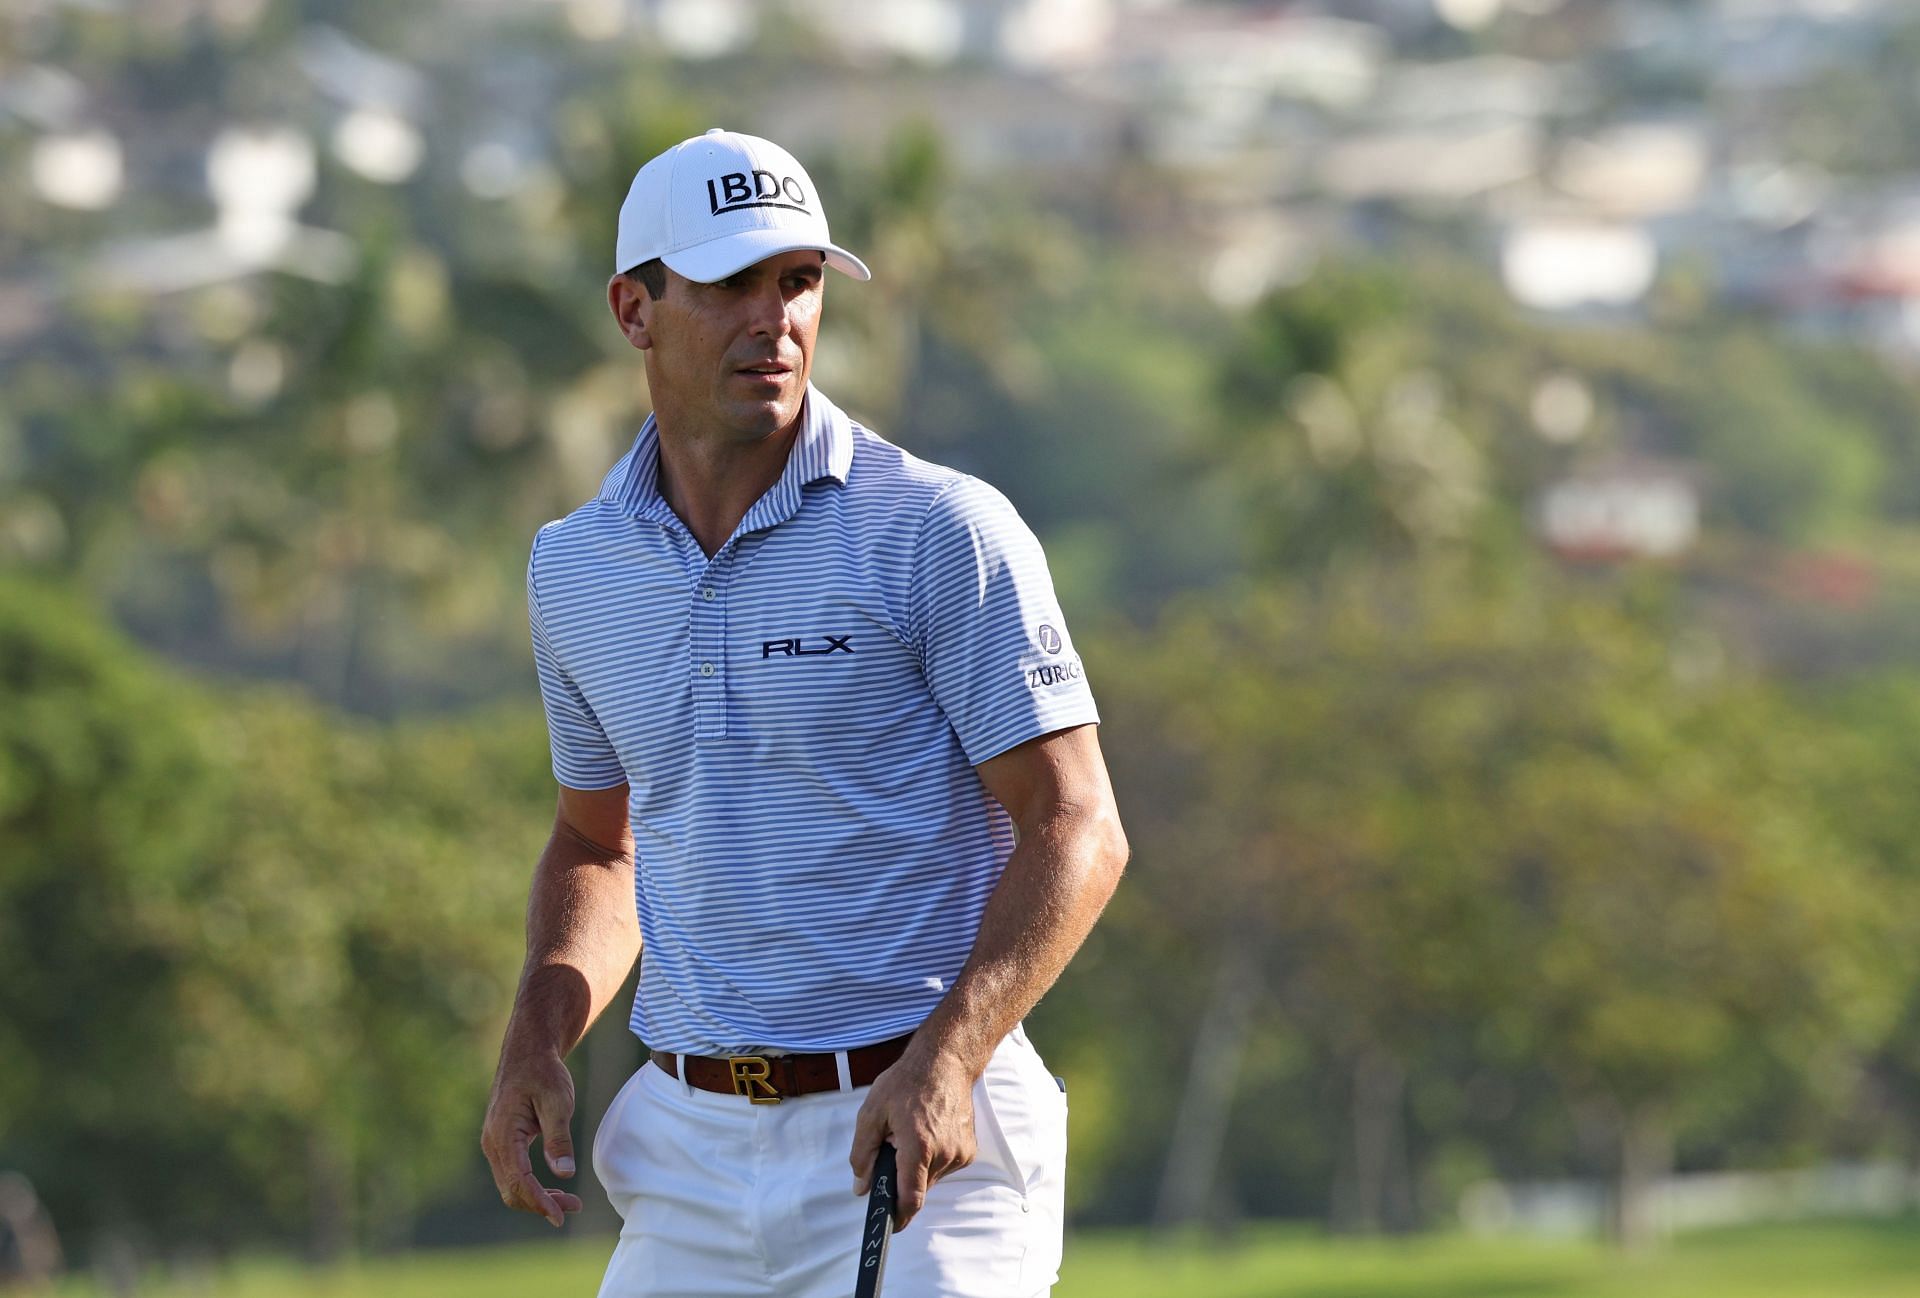 Billy Horschel is hoping to get into good form